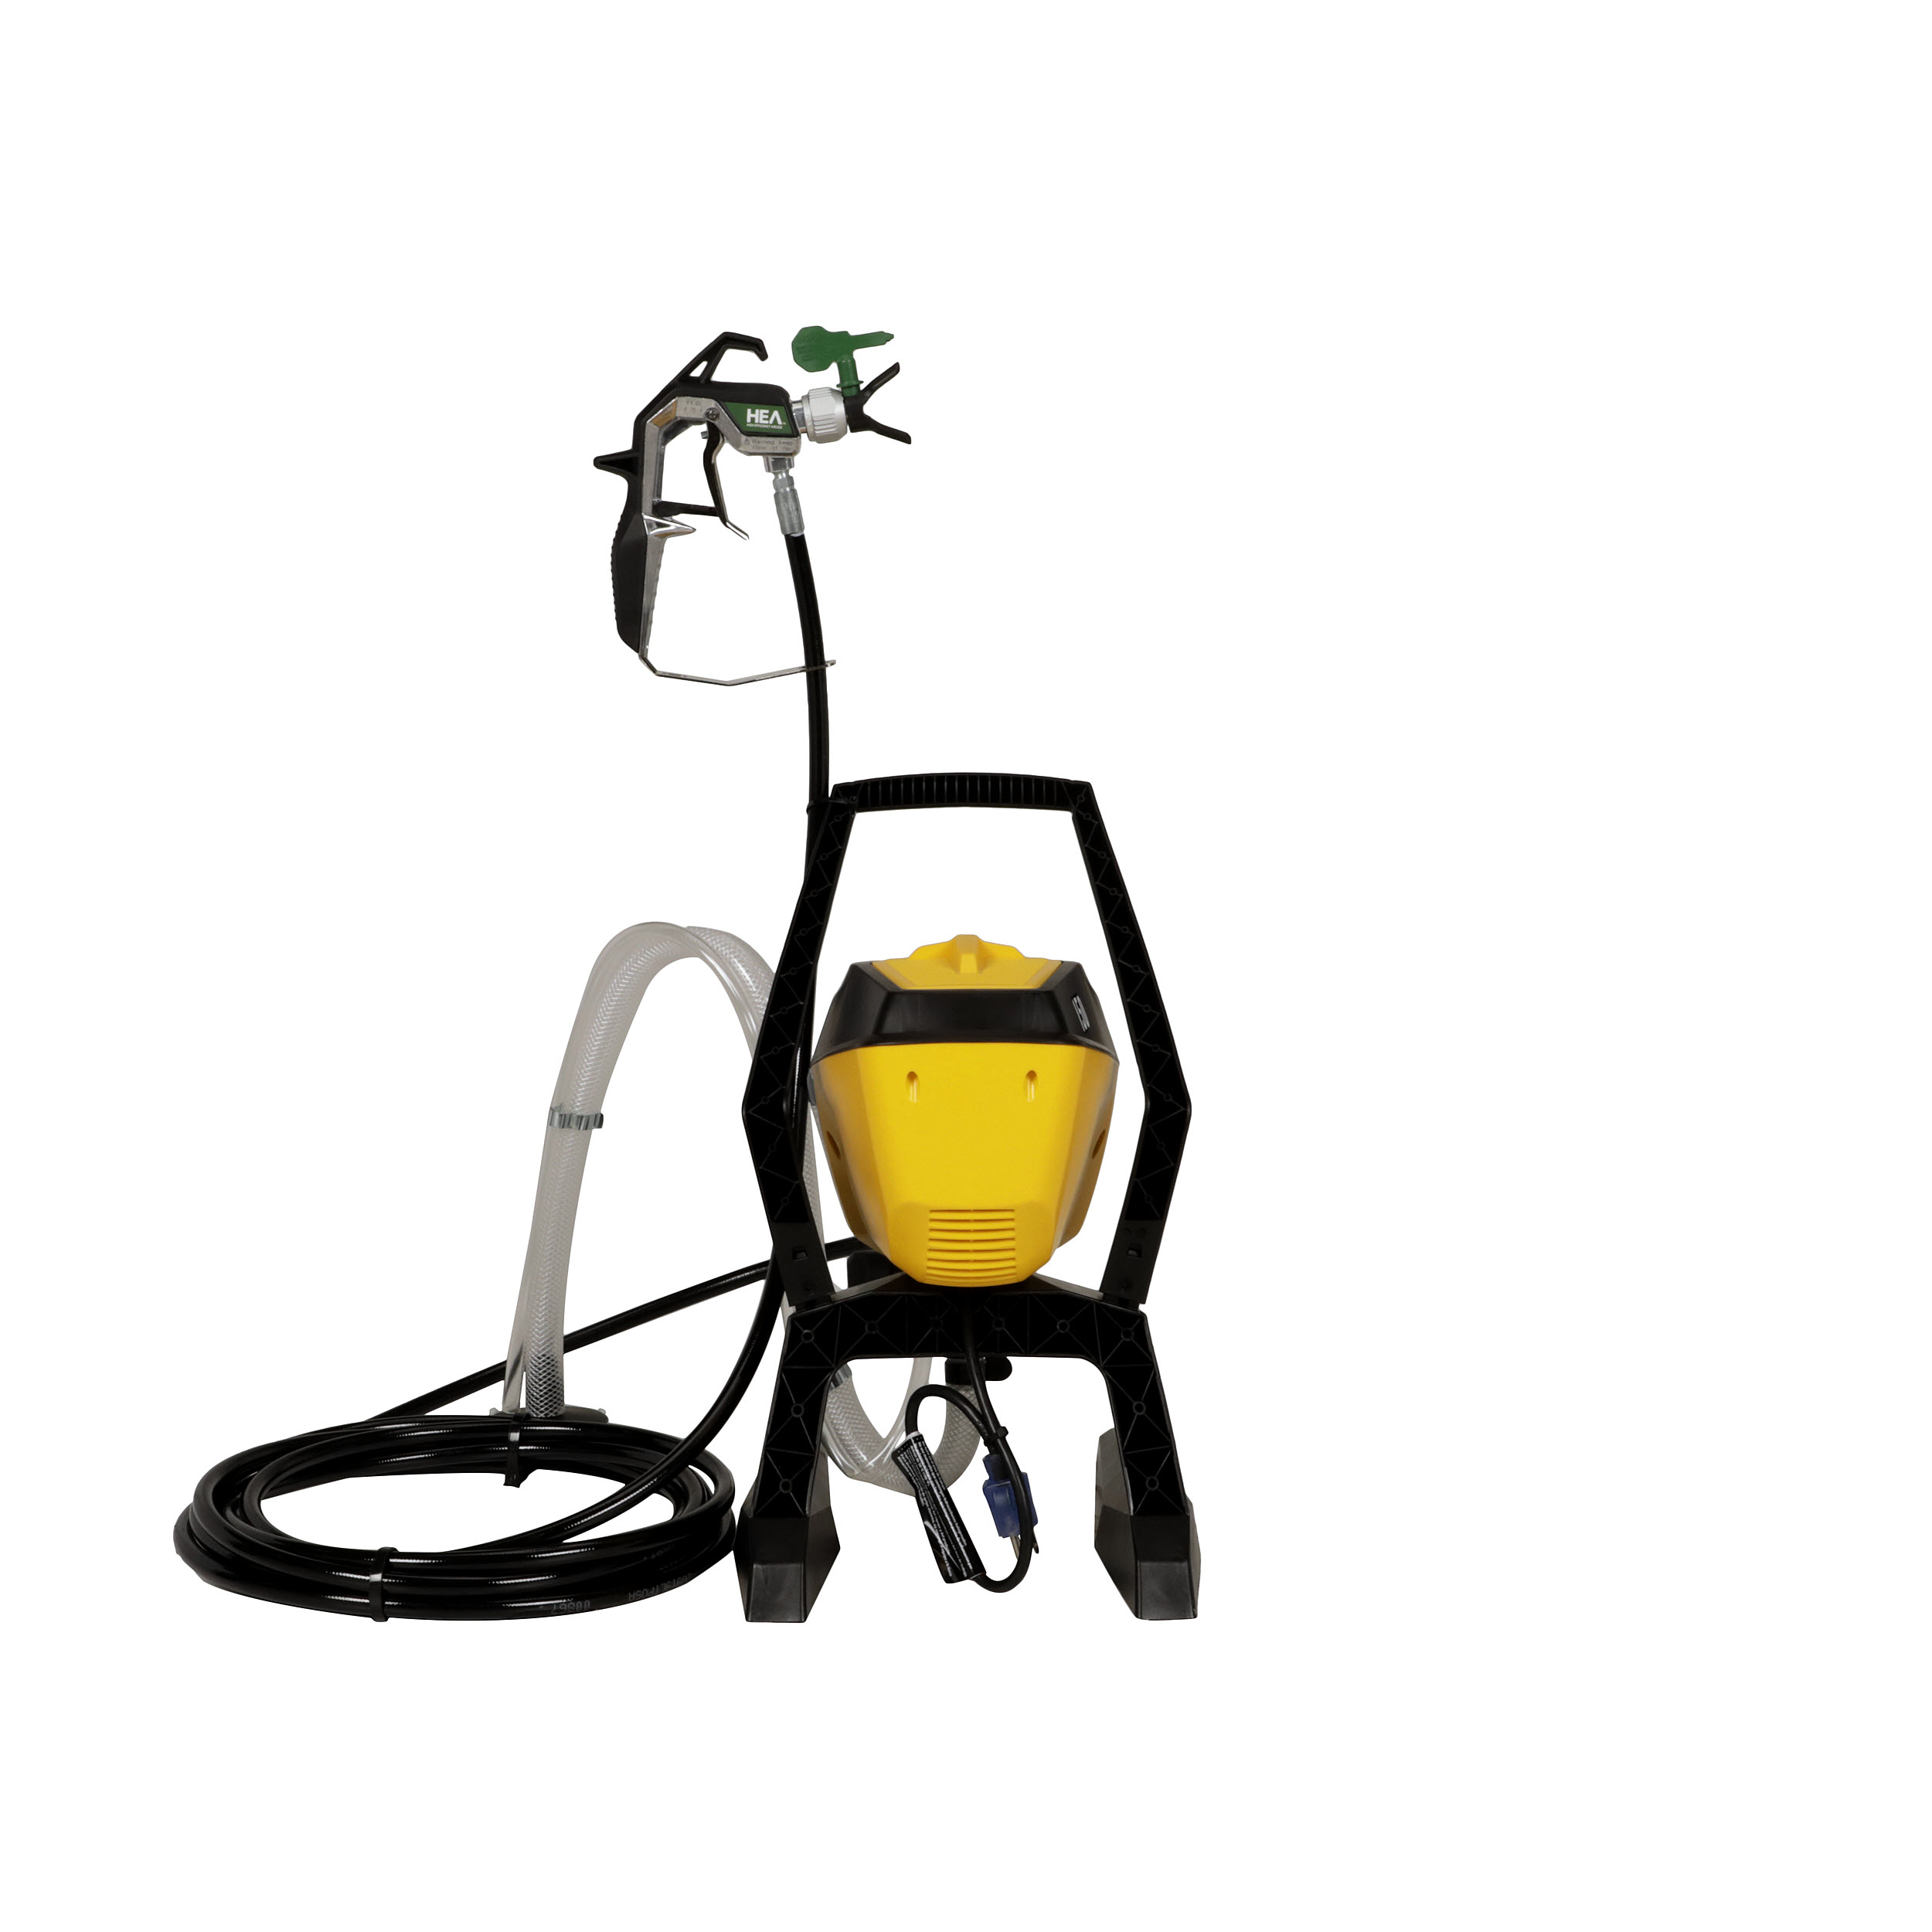 Low with Control Overspray Paint Wagner High 150 Pro Airless Efficiency Sprayer,